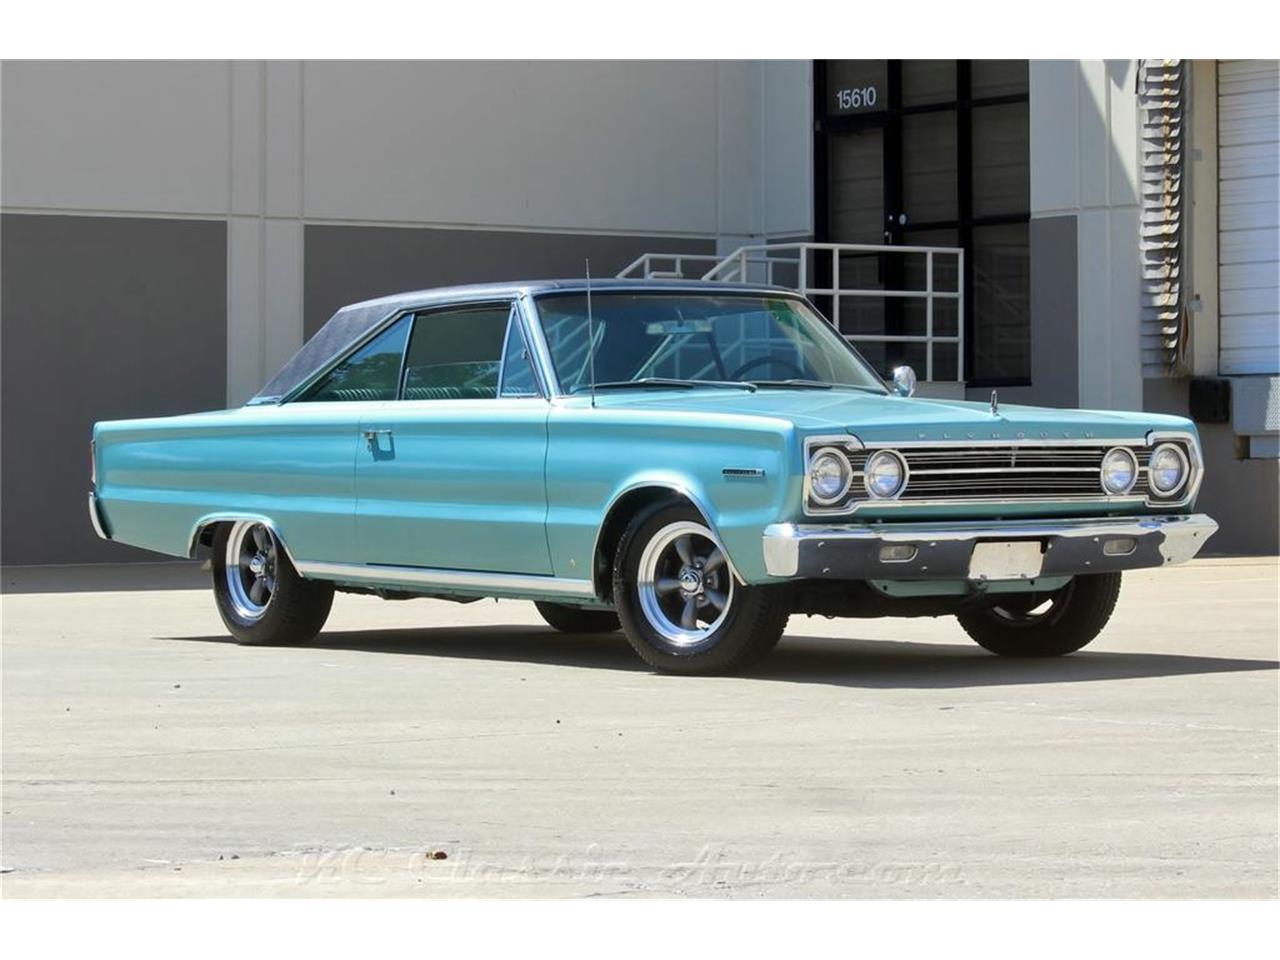 Rare Rides: The 1967 Plymouth Belvedere II R023